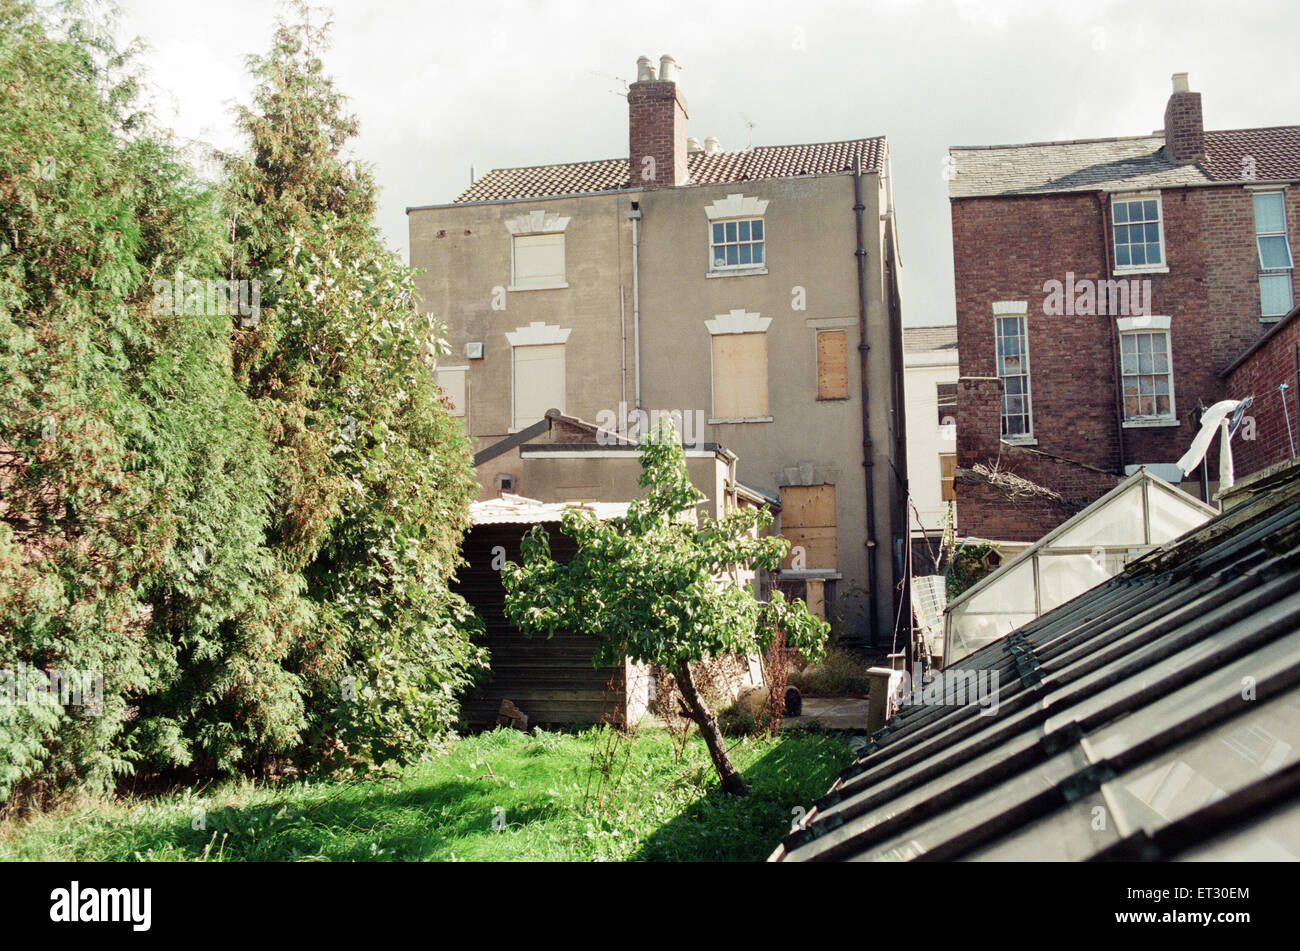 General views of houses on Cromwell Street, Gloucester. Number 25 Cromwell Street was the home of murderers Fred and Rosemary West. 5th October 1995. Stock Photo